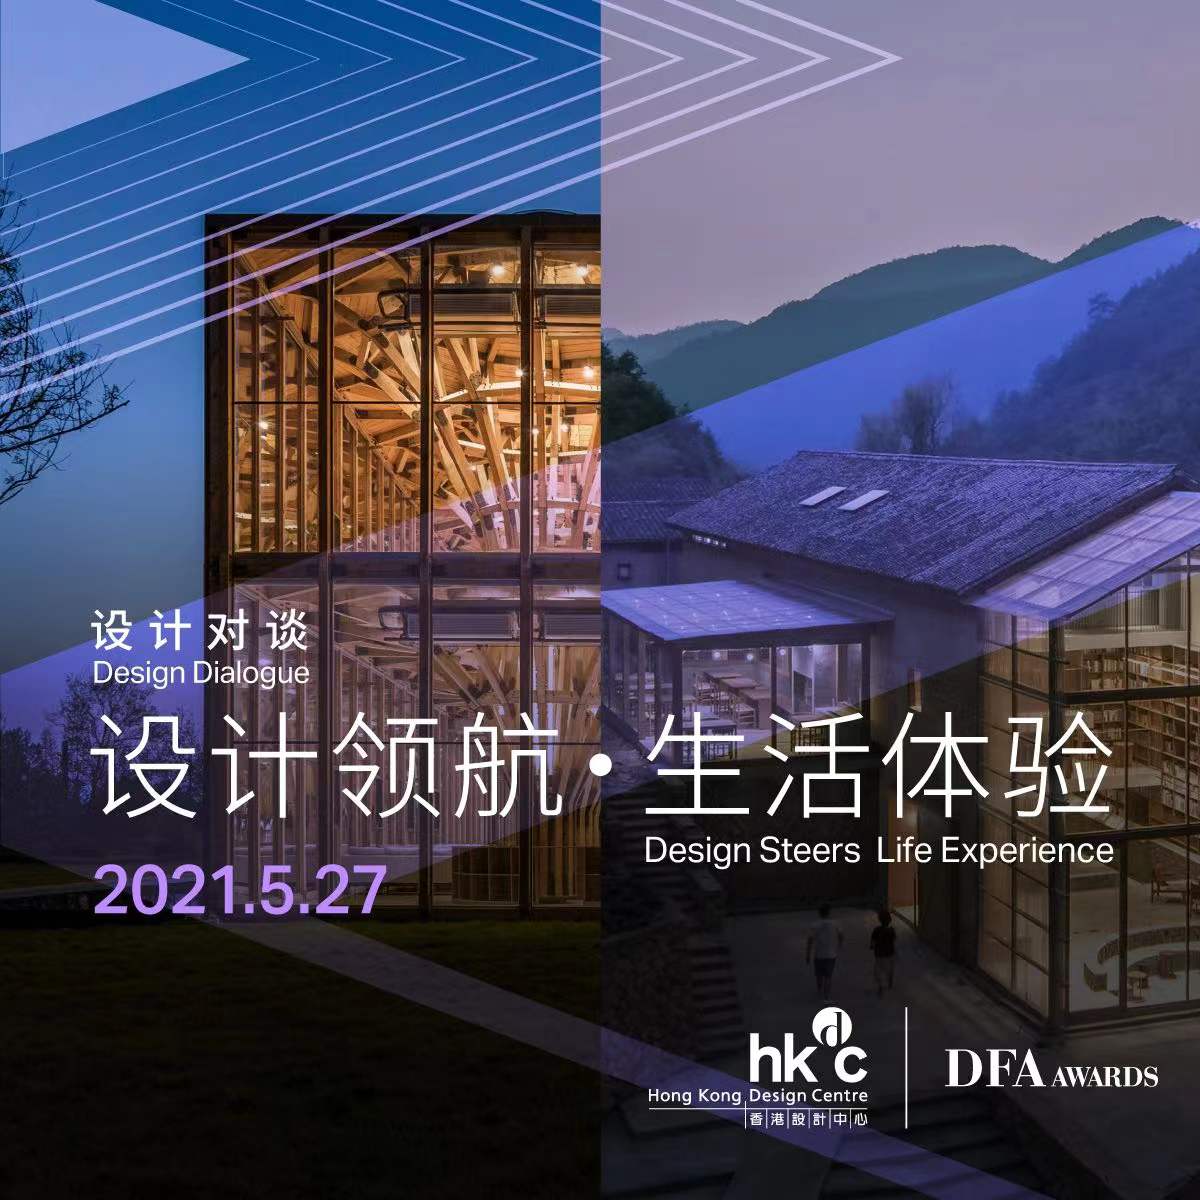 Invited by DFA – Design For Asia, the winners of DFA 2020 — Tao Liu, Chunyan Cai from atelier tao+c, and Yujie Luo from LUO studio interviewed with Steve Leung.